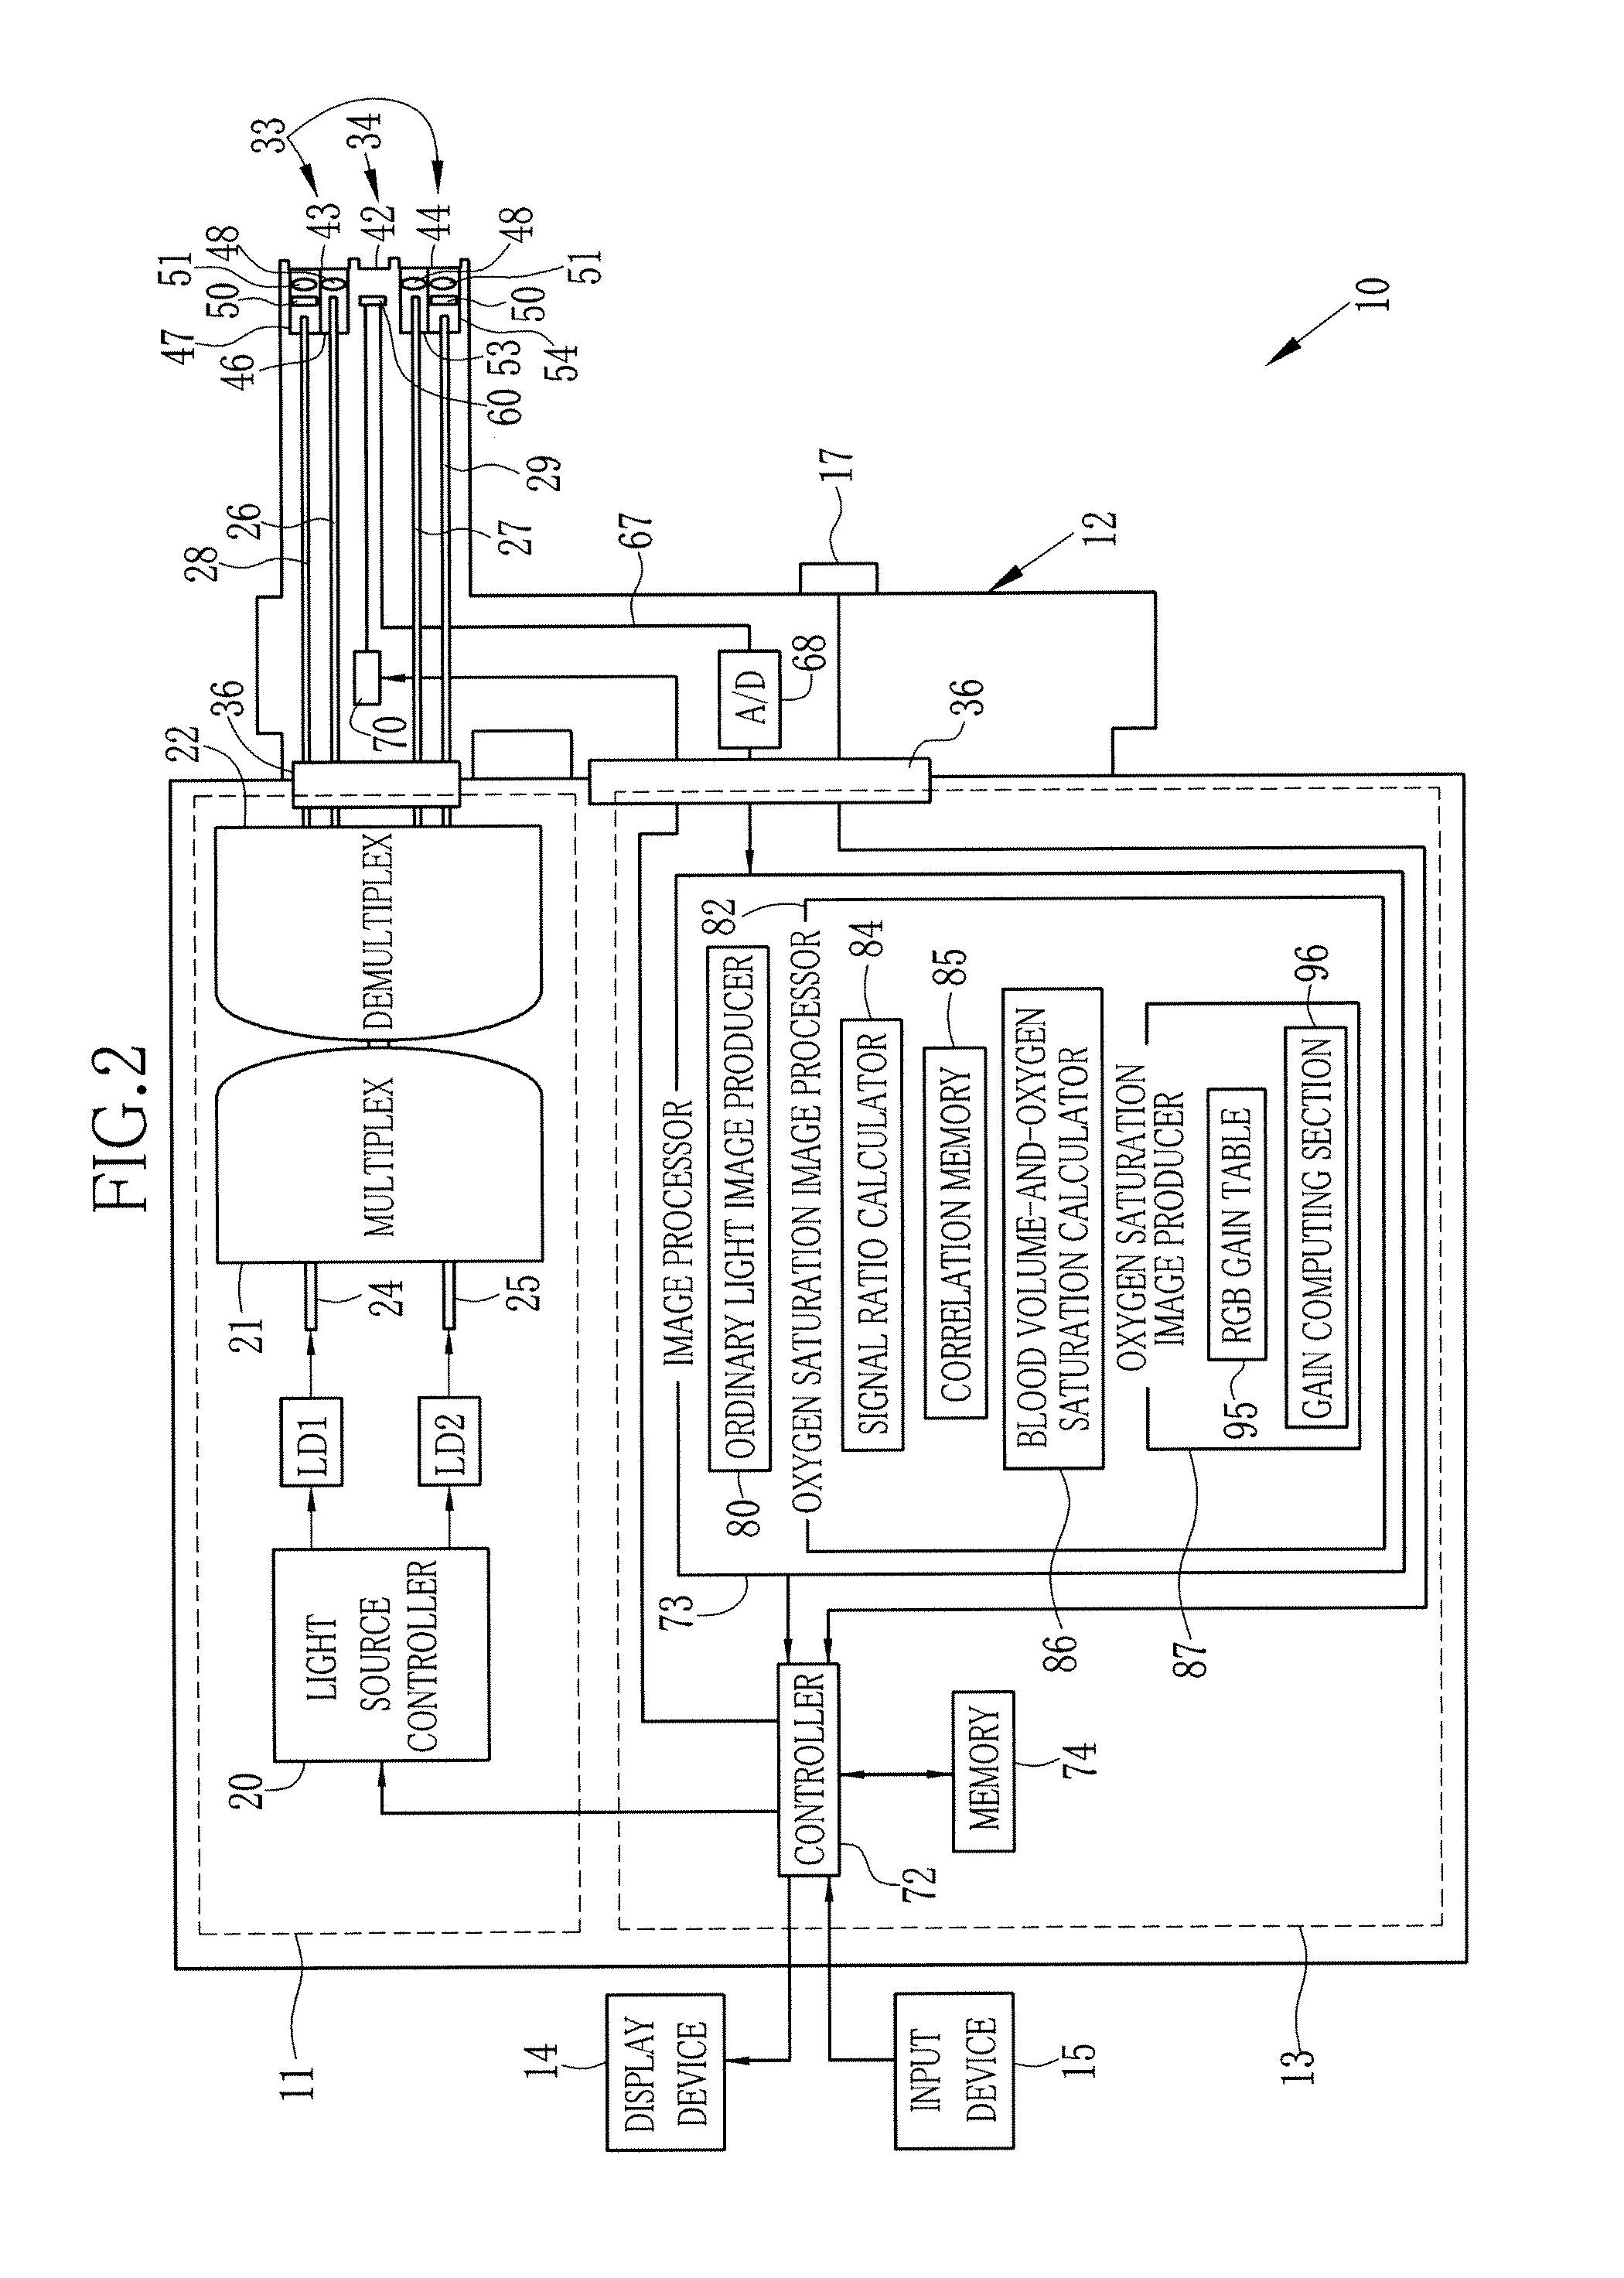 Endoscope system, processor of endoscope system, and image producing method